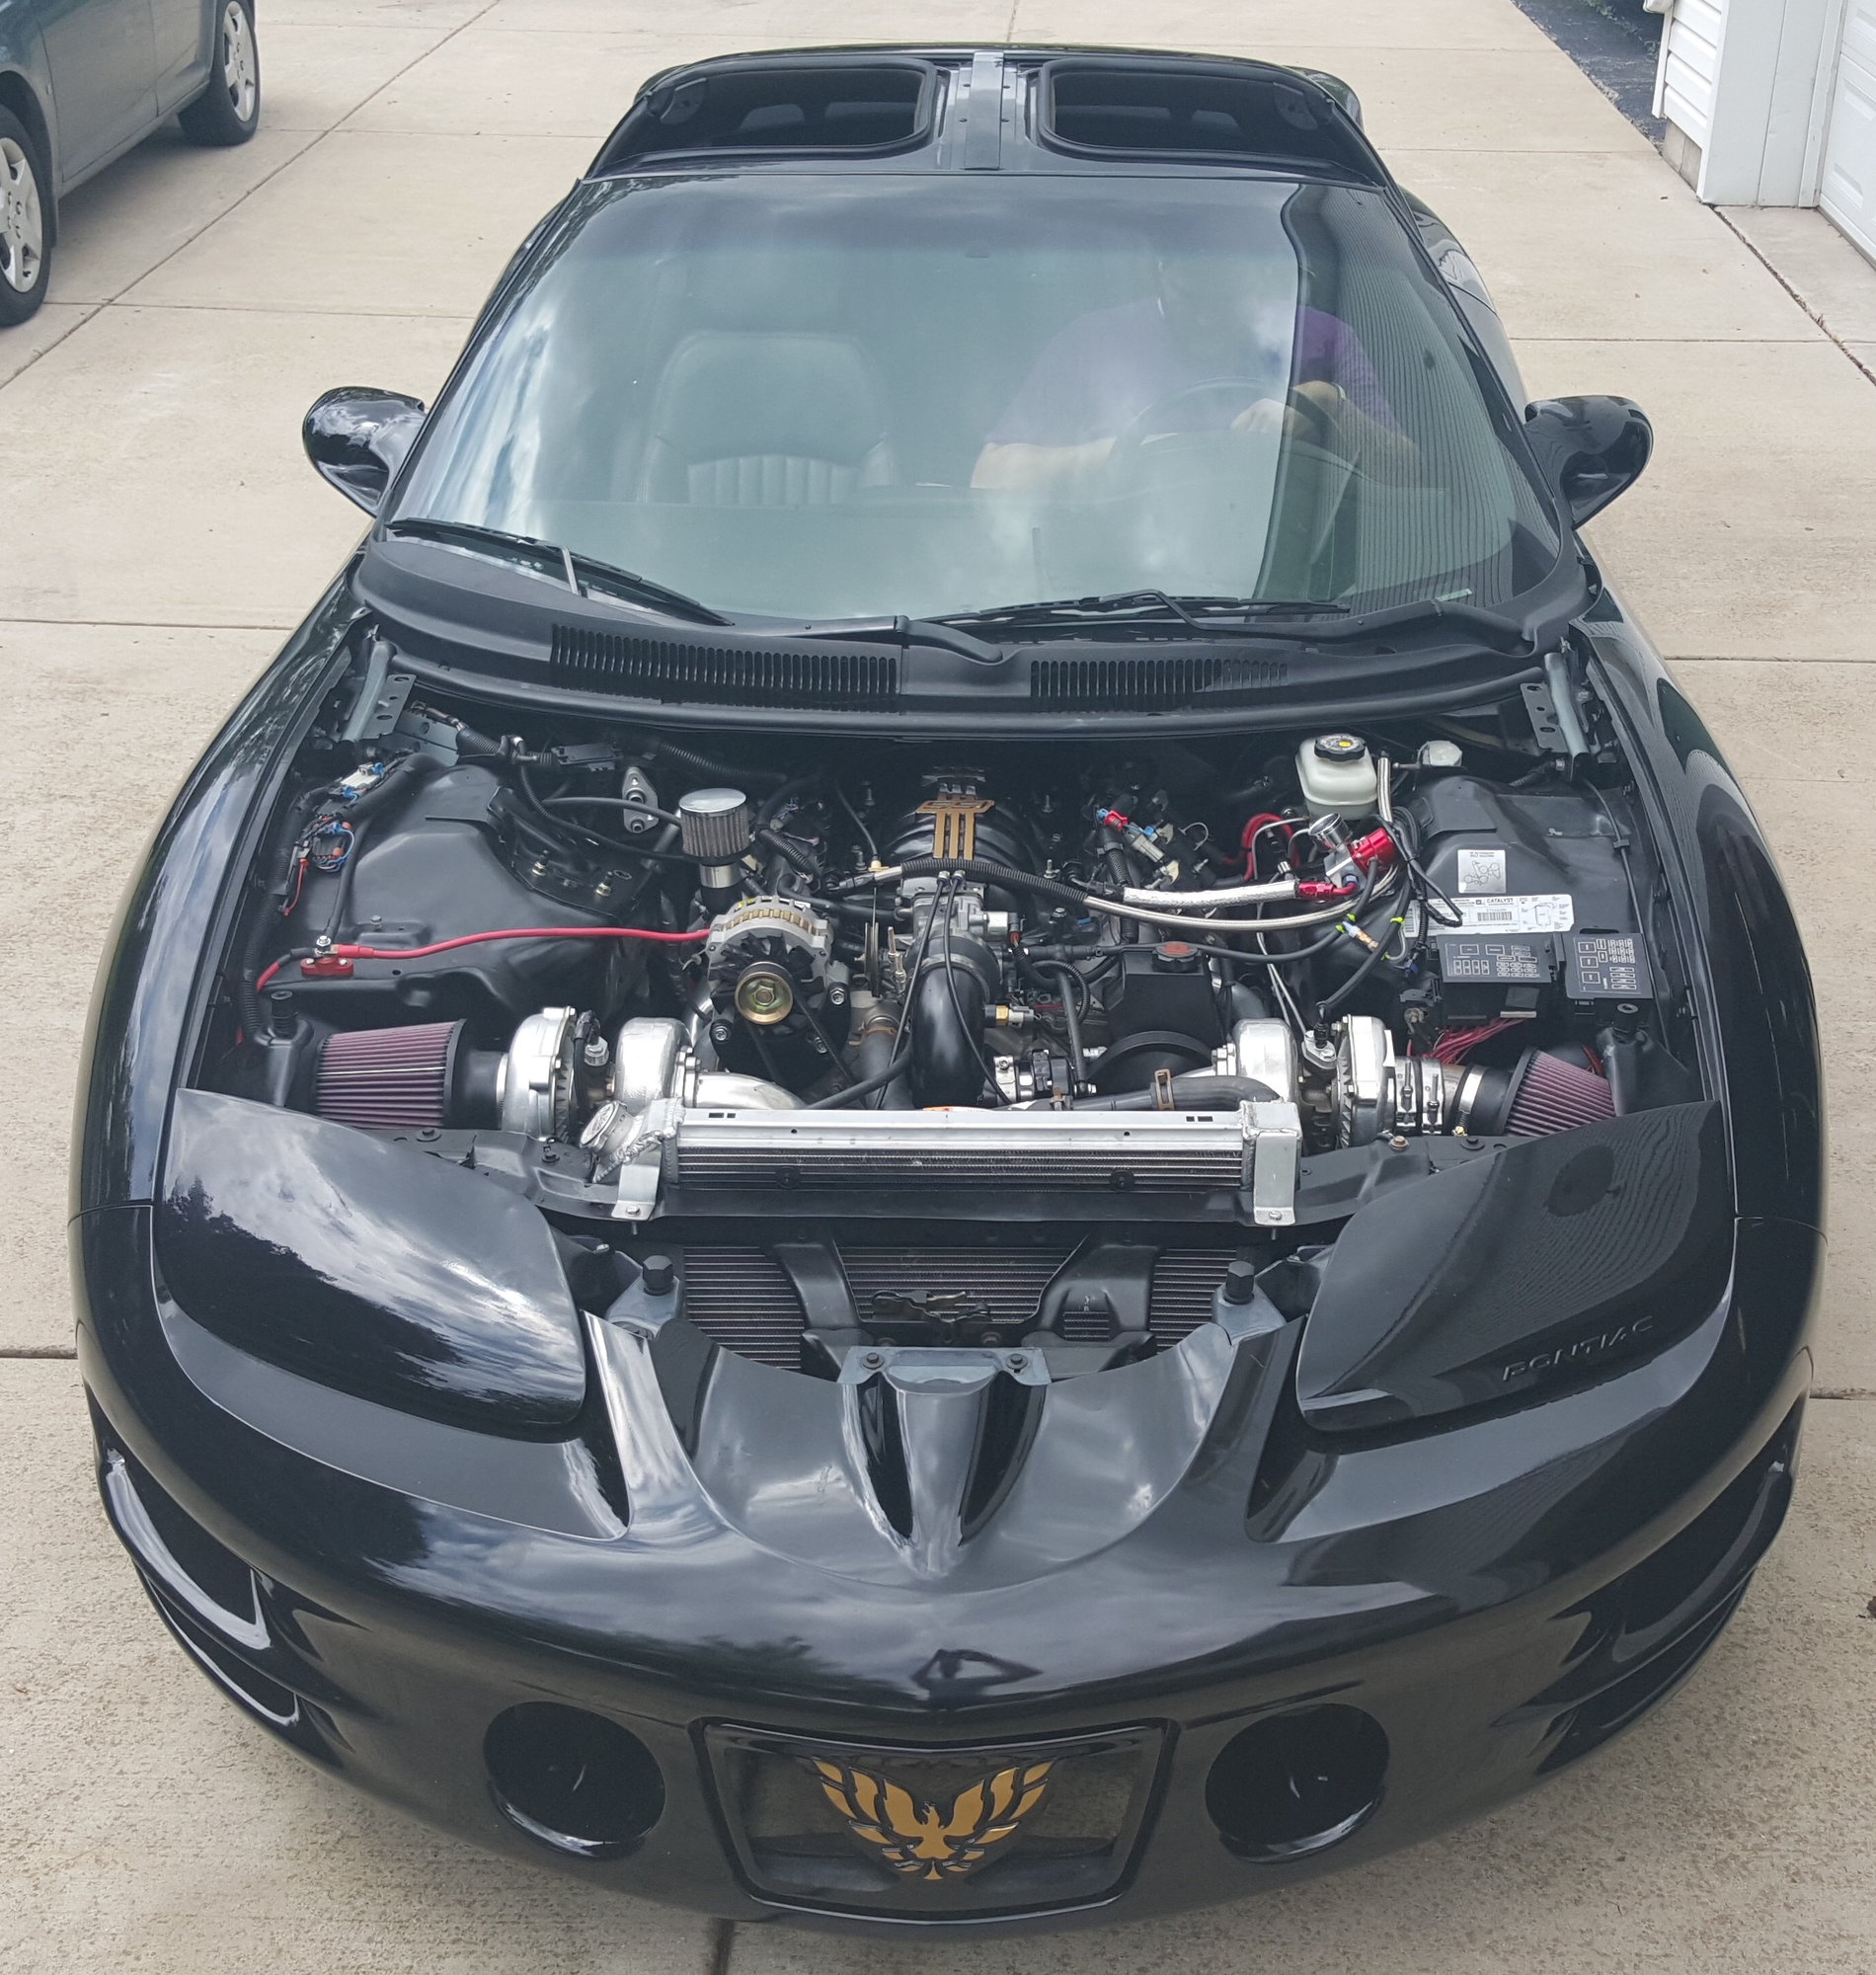 2000 Pontiac Firebird - F/S Trans am WS6 Twin Turbo *Low Miles* - Used - VIN 2G2FV22G1Y2161831 - 10,500 Miles - 8 cyl - 2WD - Manual - Coupe - Black - Addison, IL 60101, United States